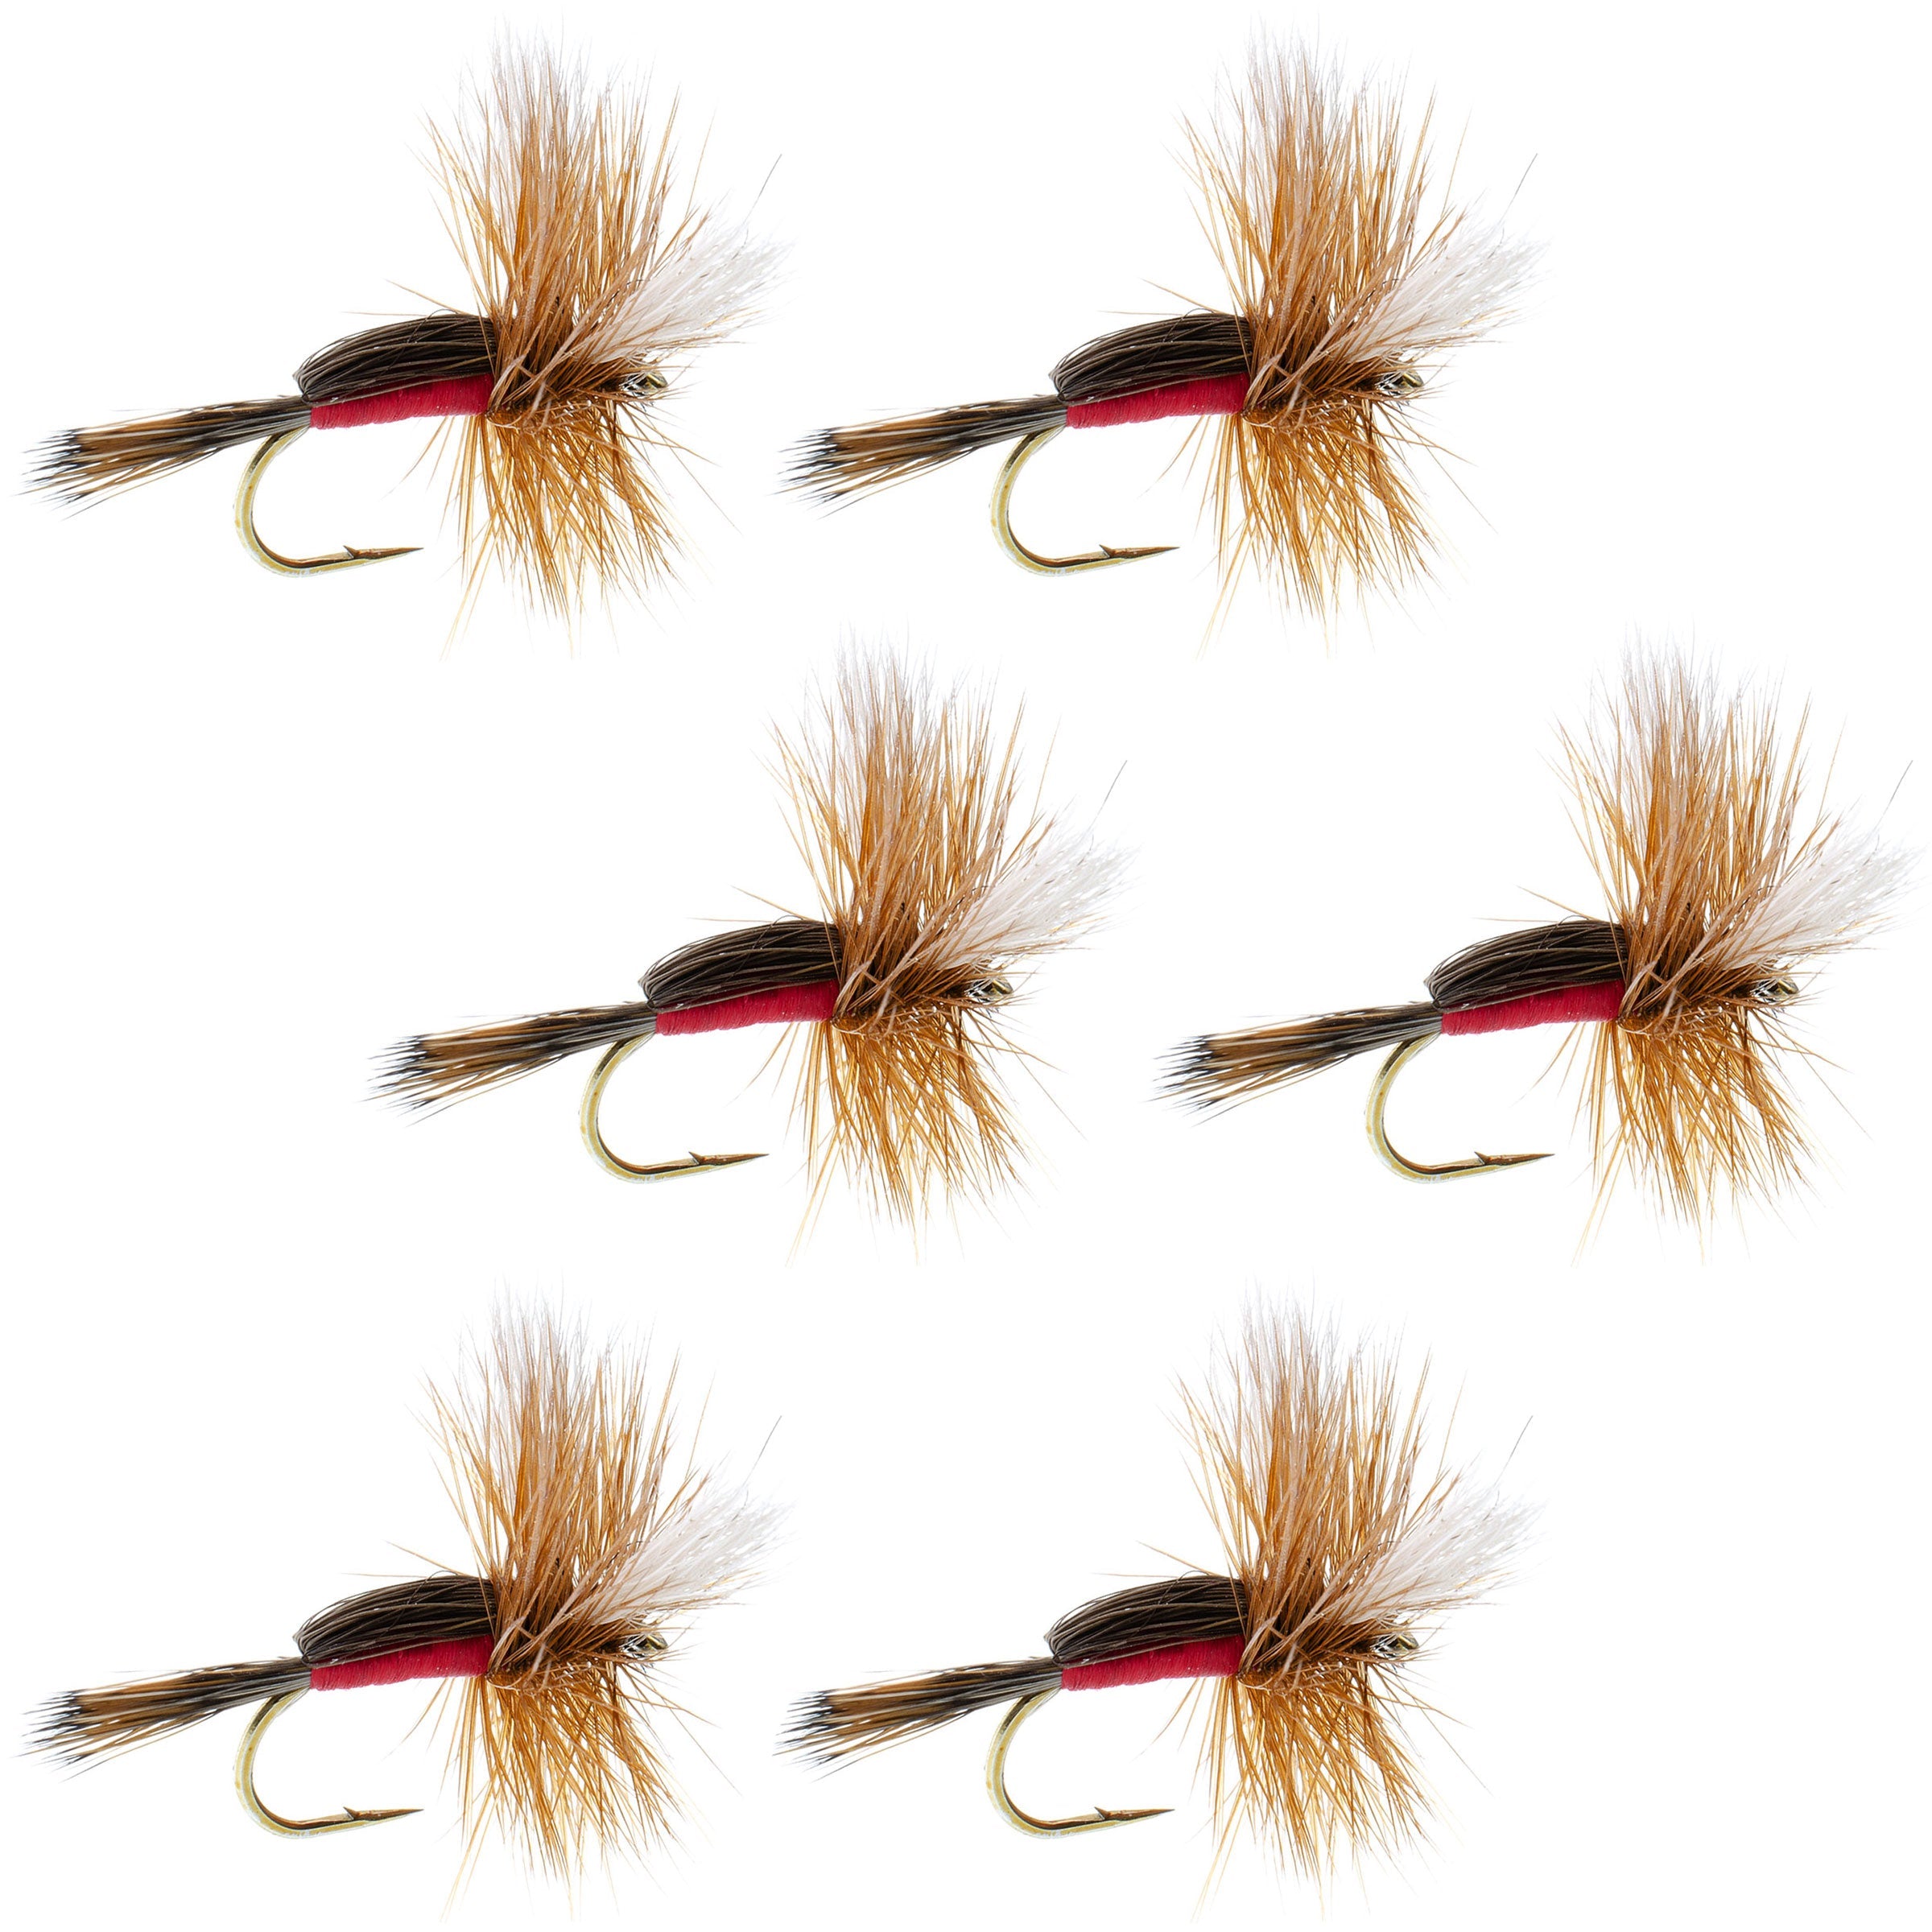 Royal Humpy Classic Hair Wing Dry Fly - 6 Flies Hook Size 14